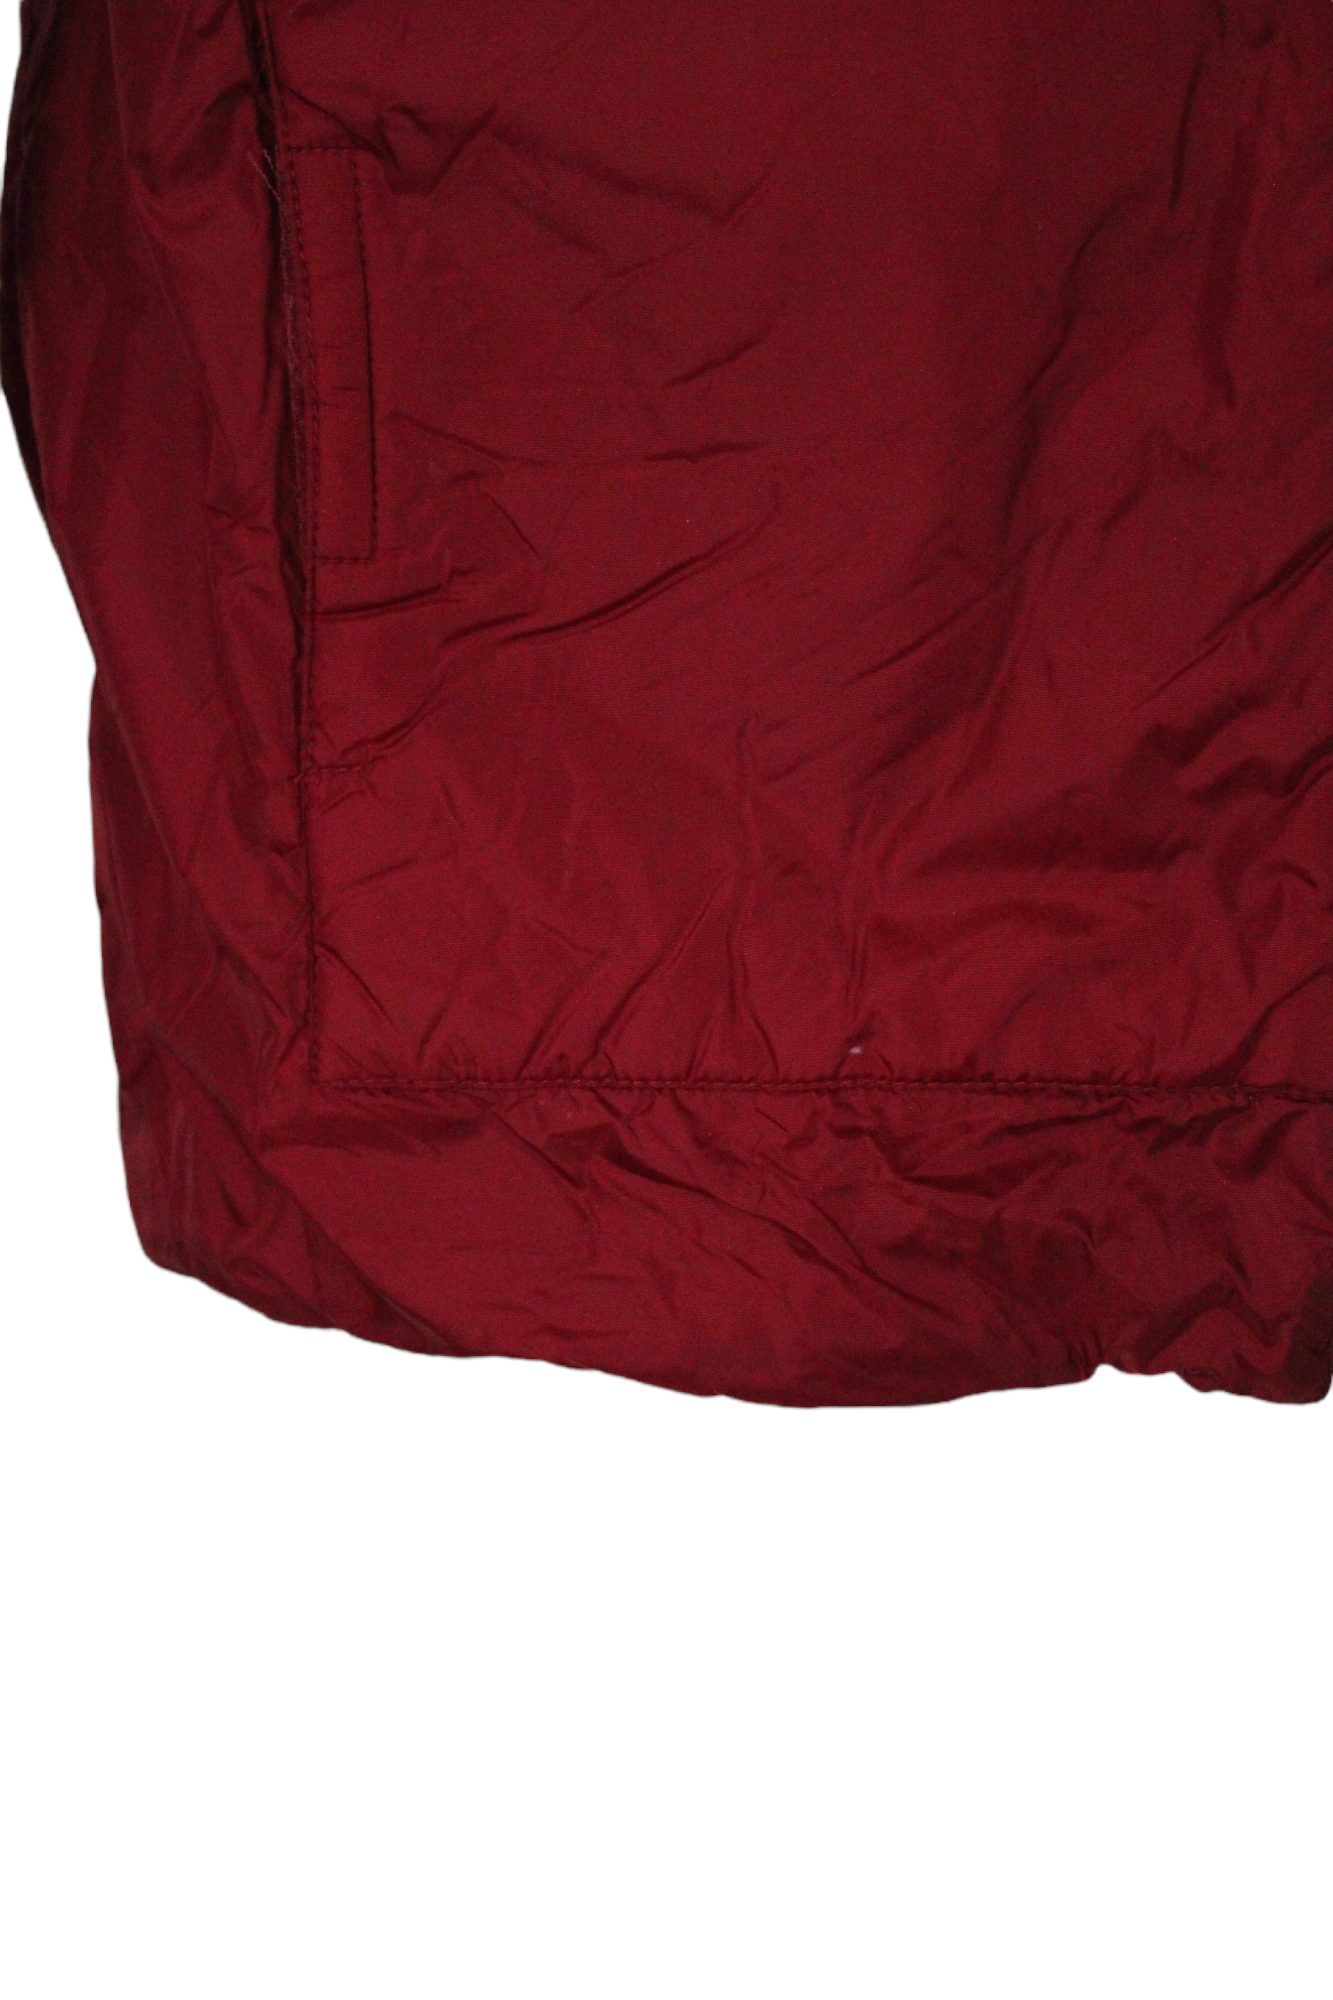 Old Navy Red Fleece Lined Jacket | S